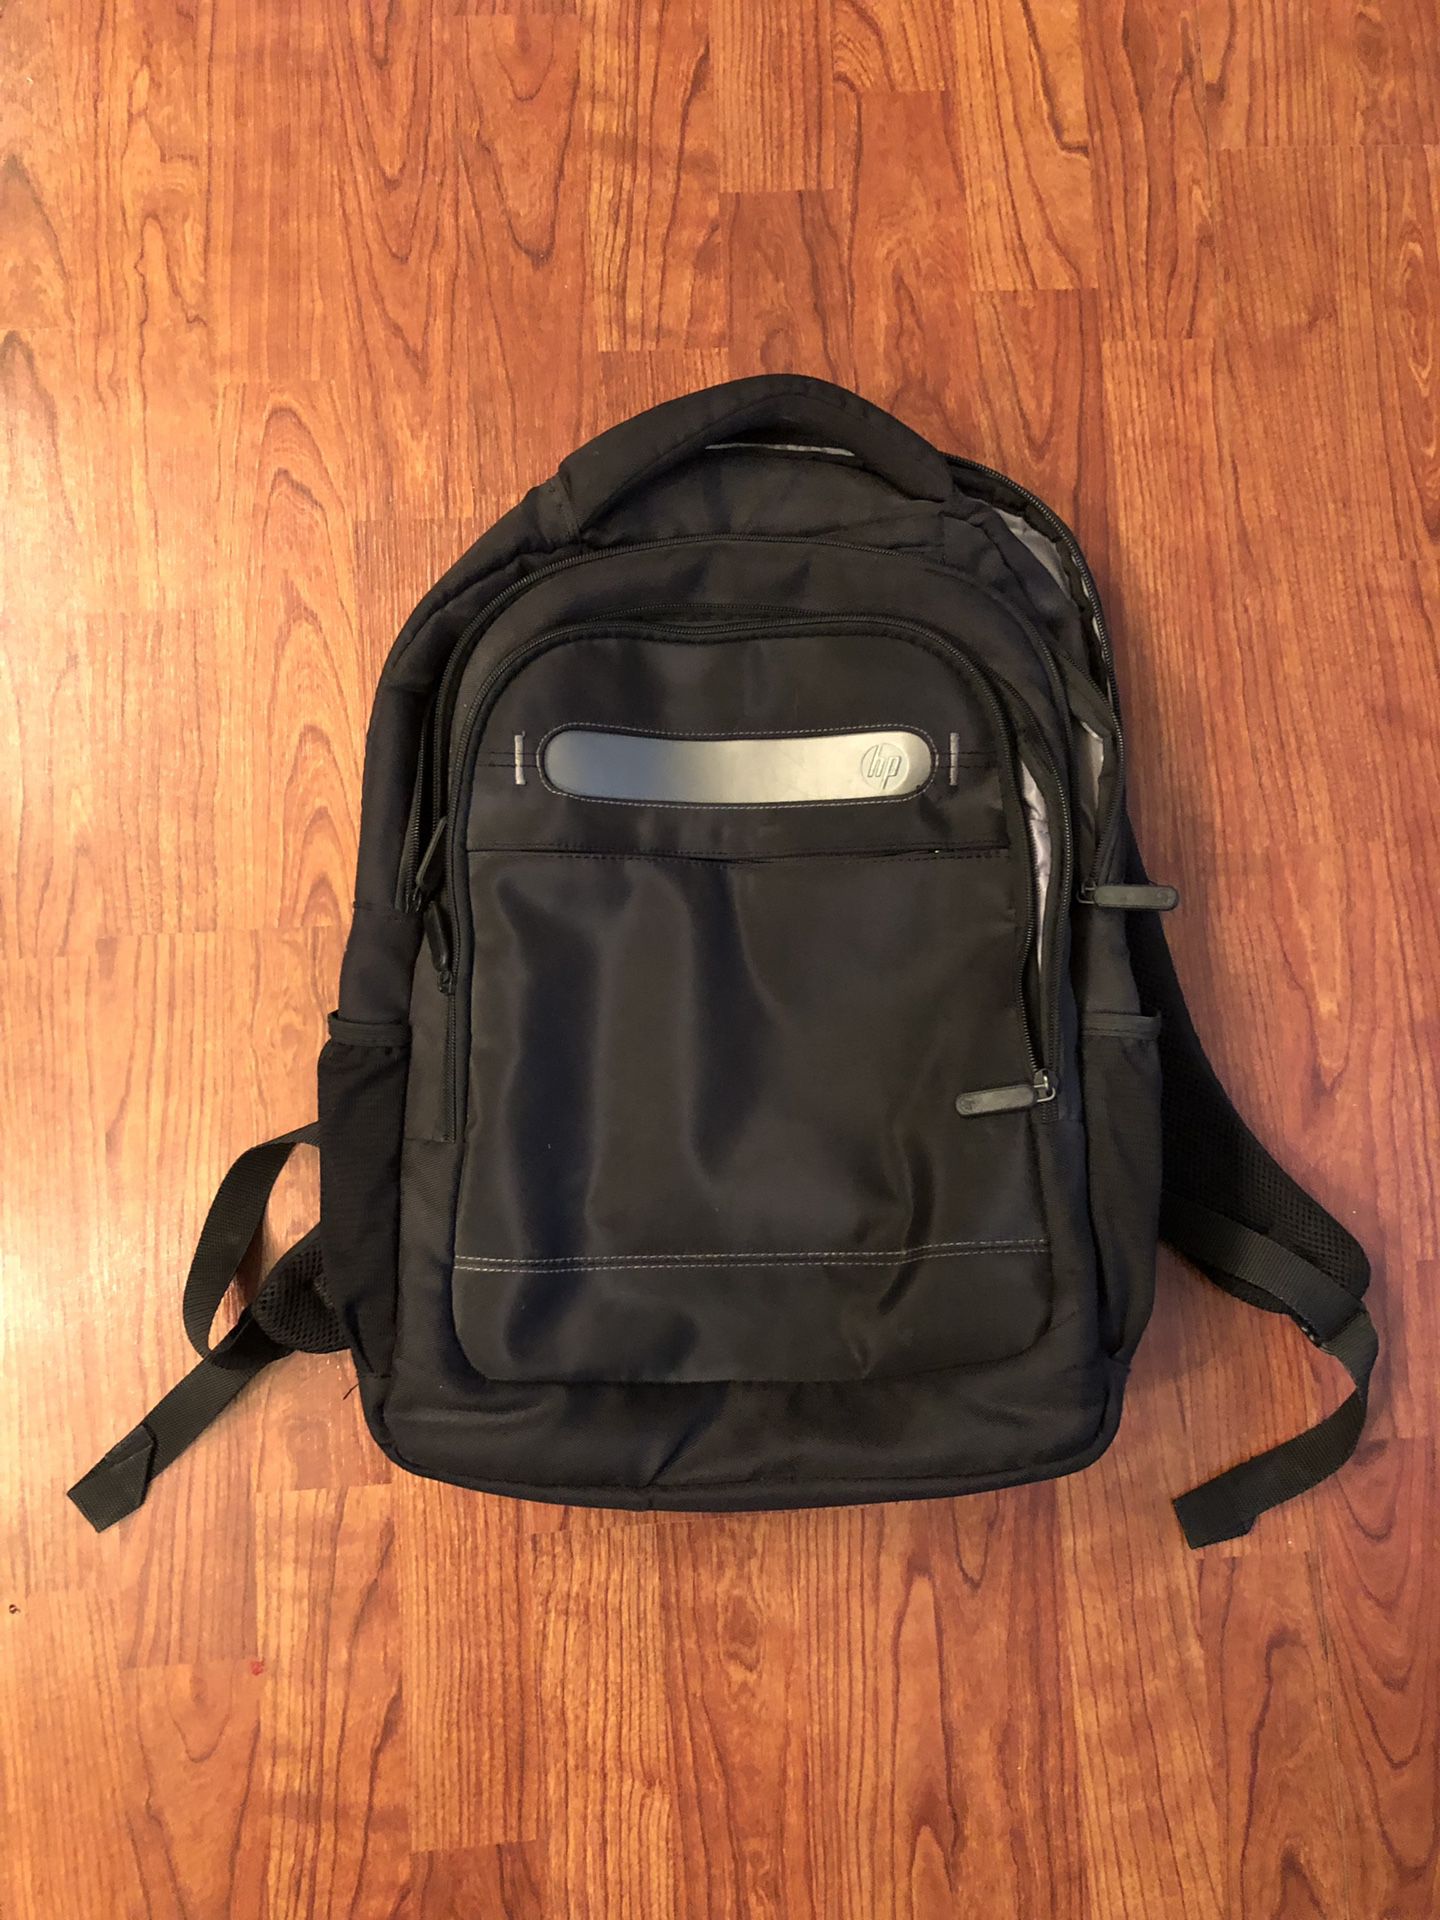 Professional HP Laptop Backpack